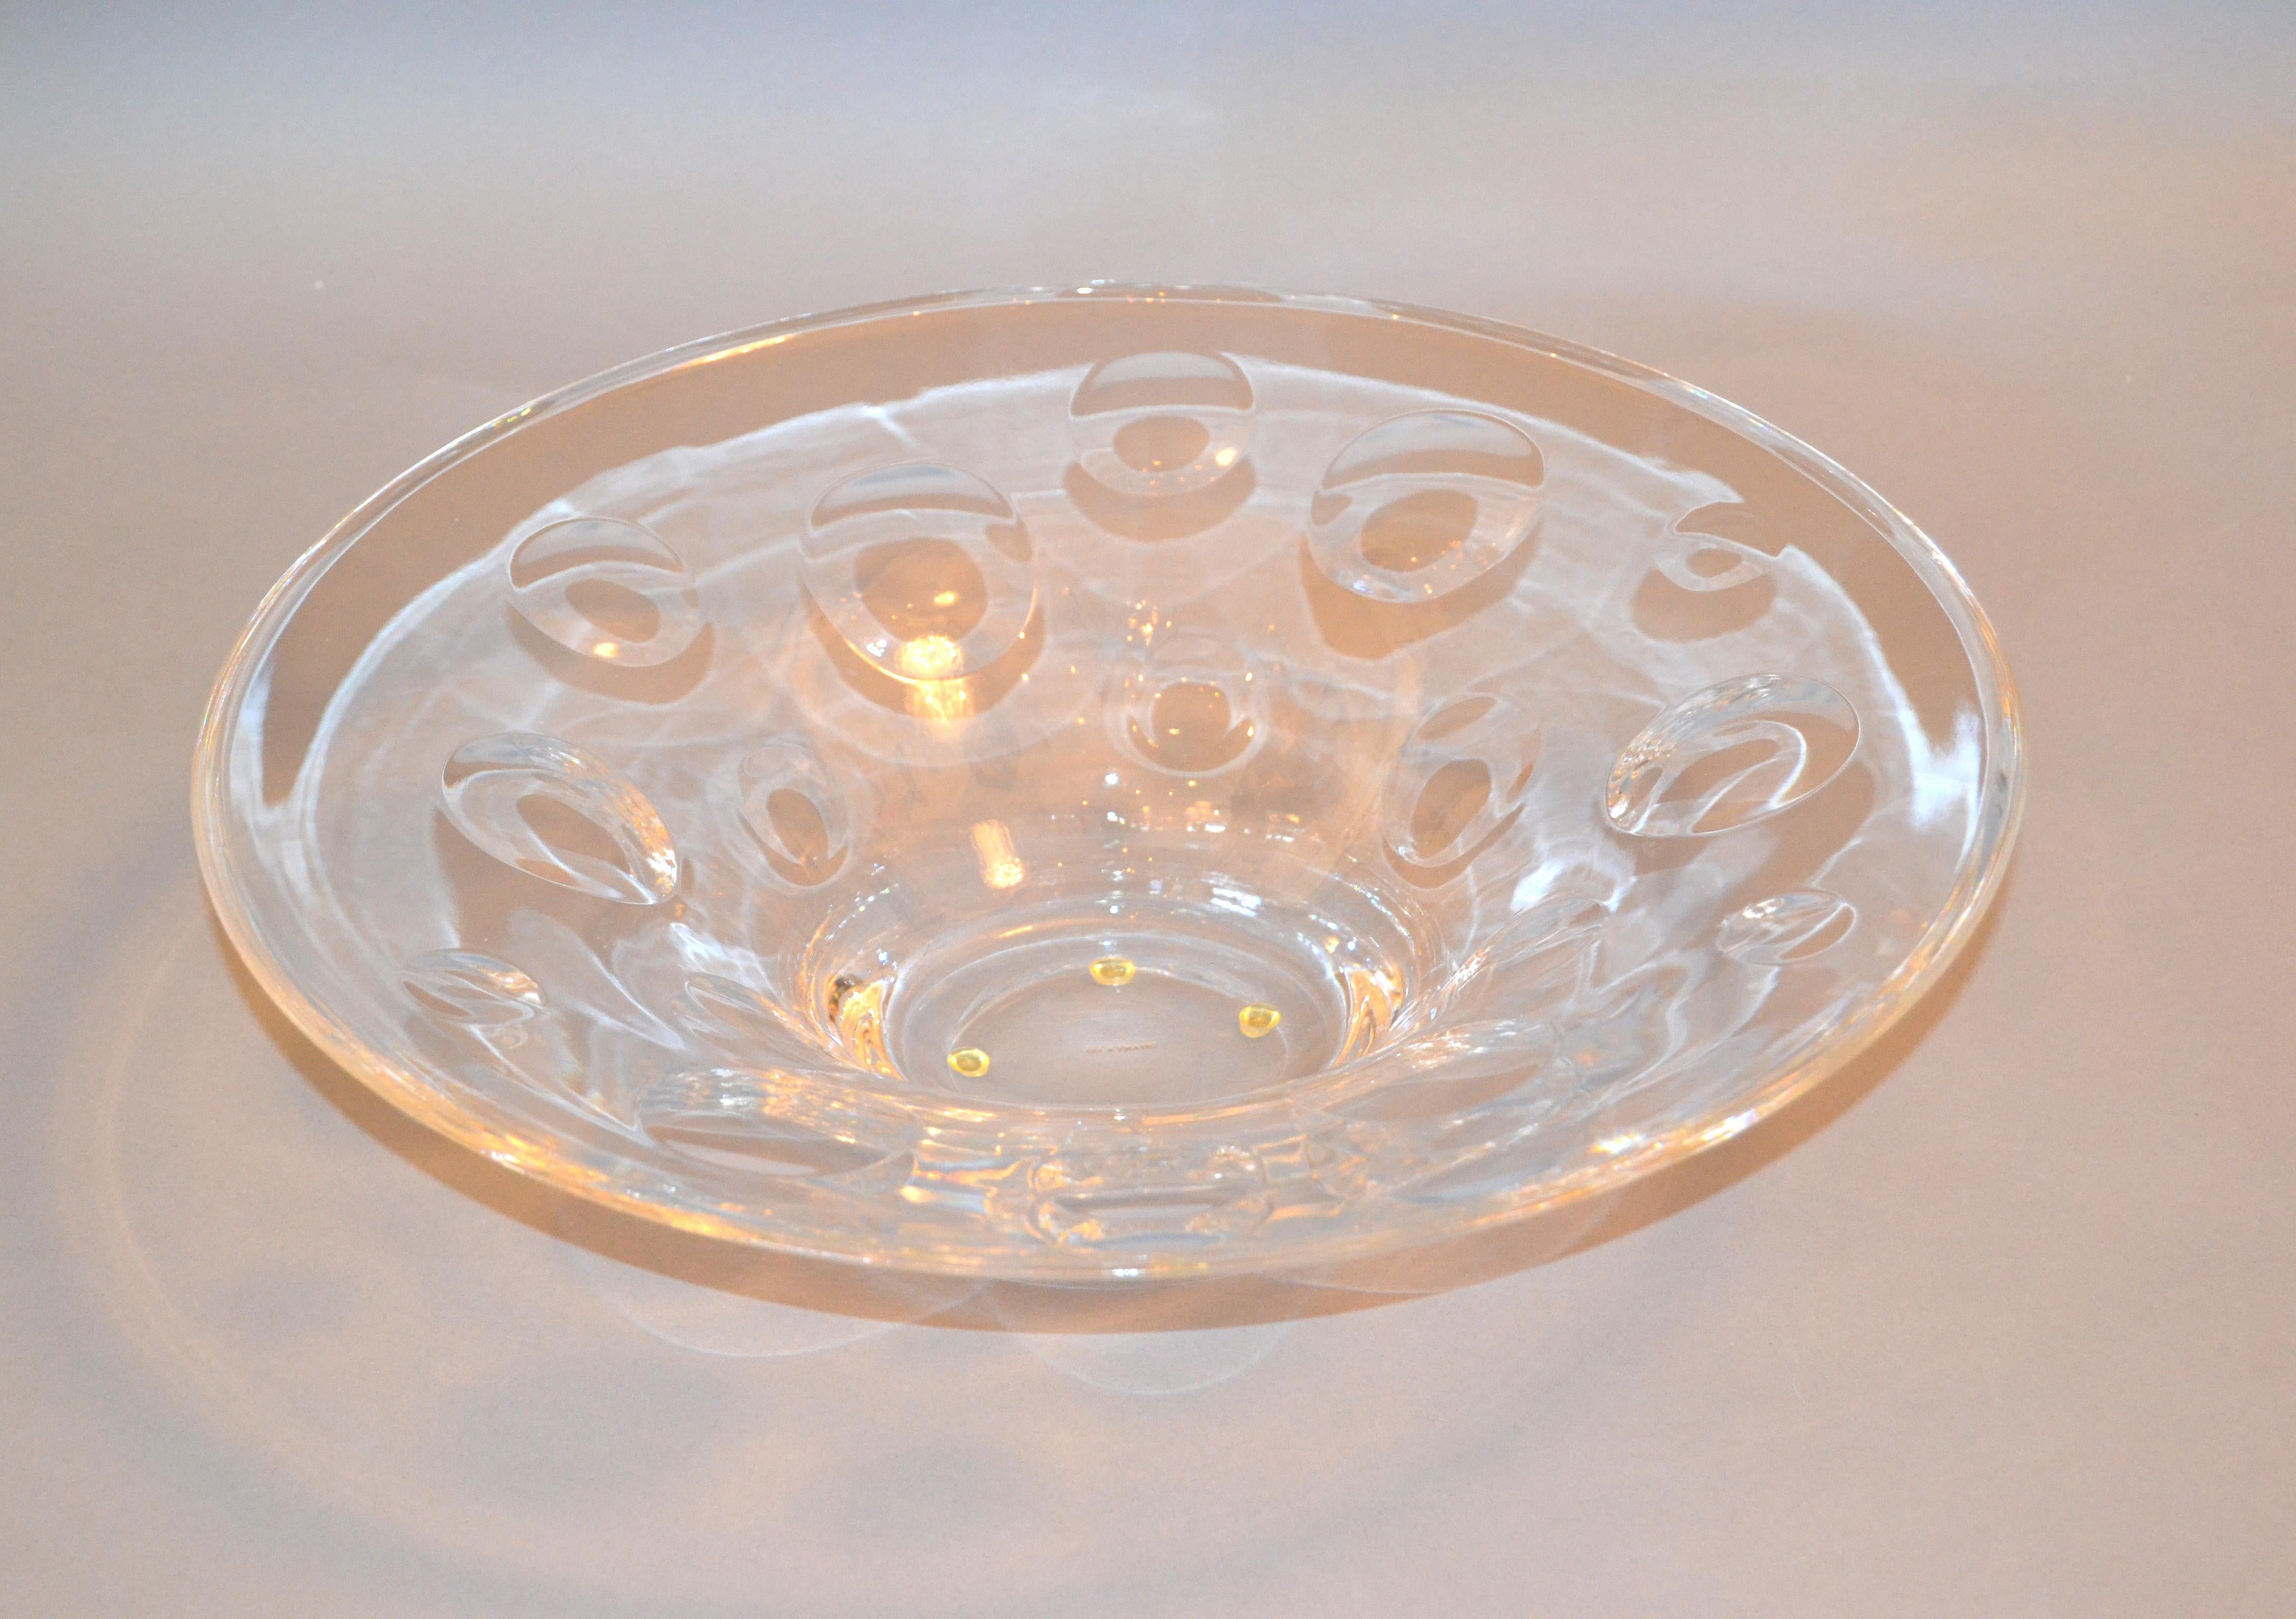 1940s Art Deco Large Tiffany & Company Art Glass Crystal Bowl with Bubbles 3